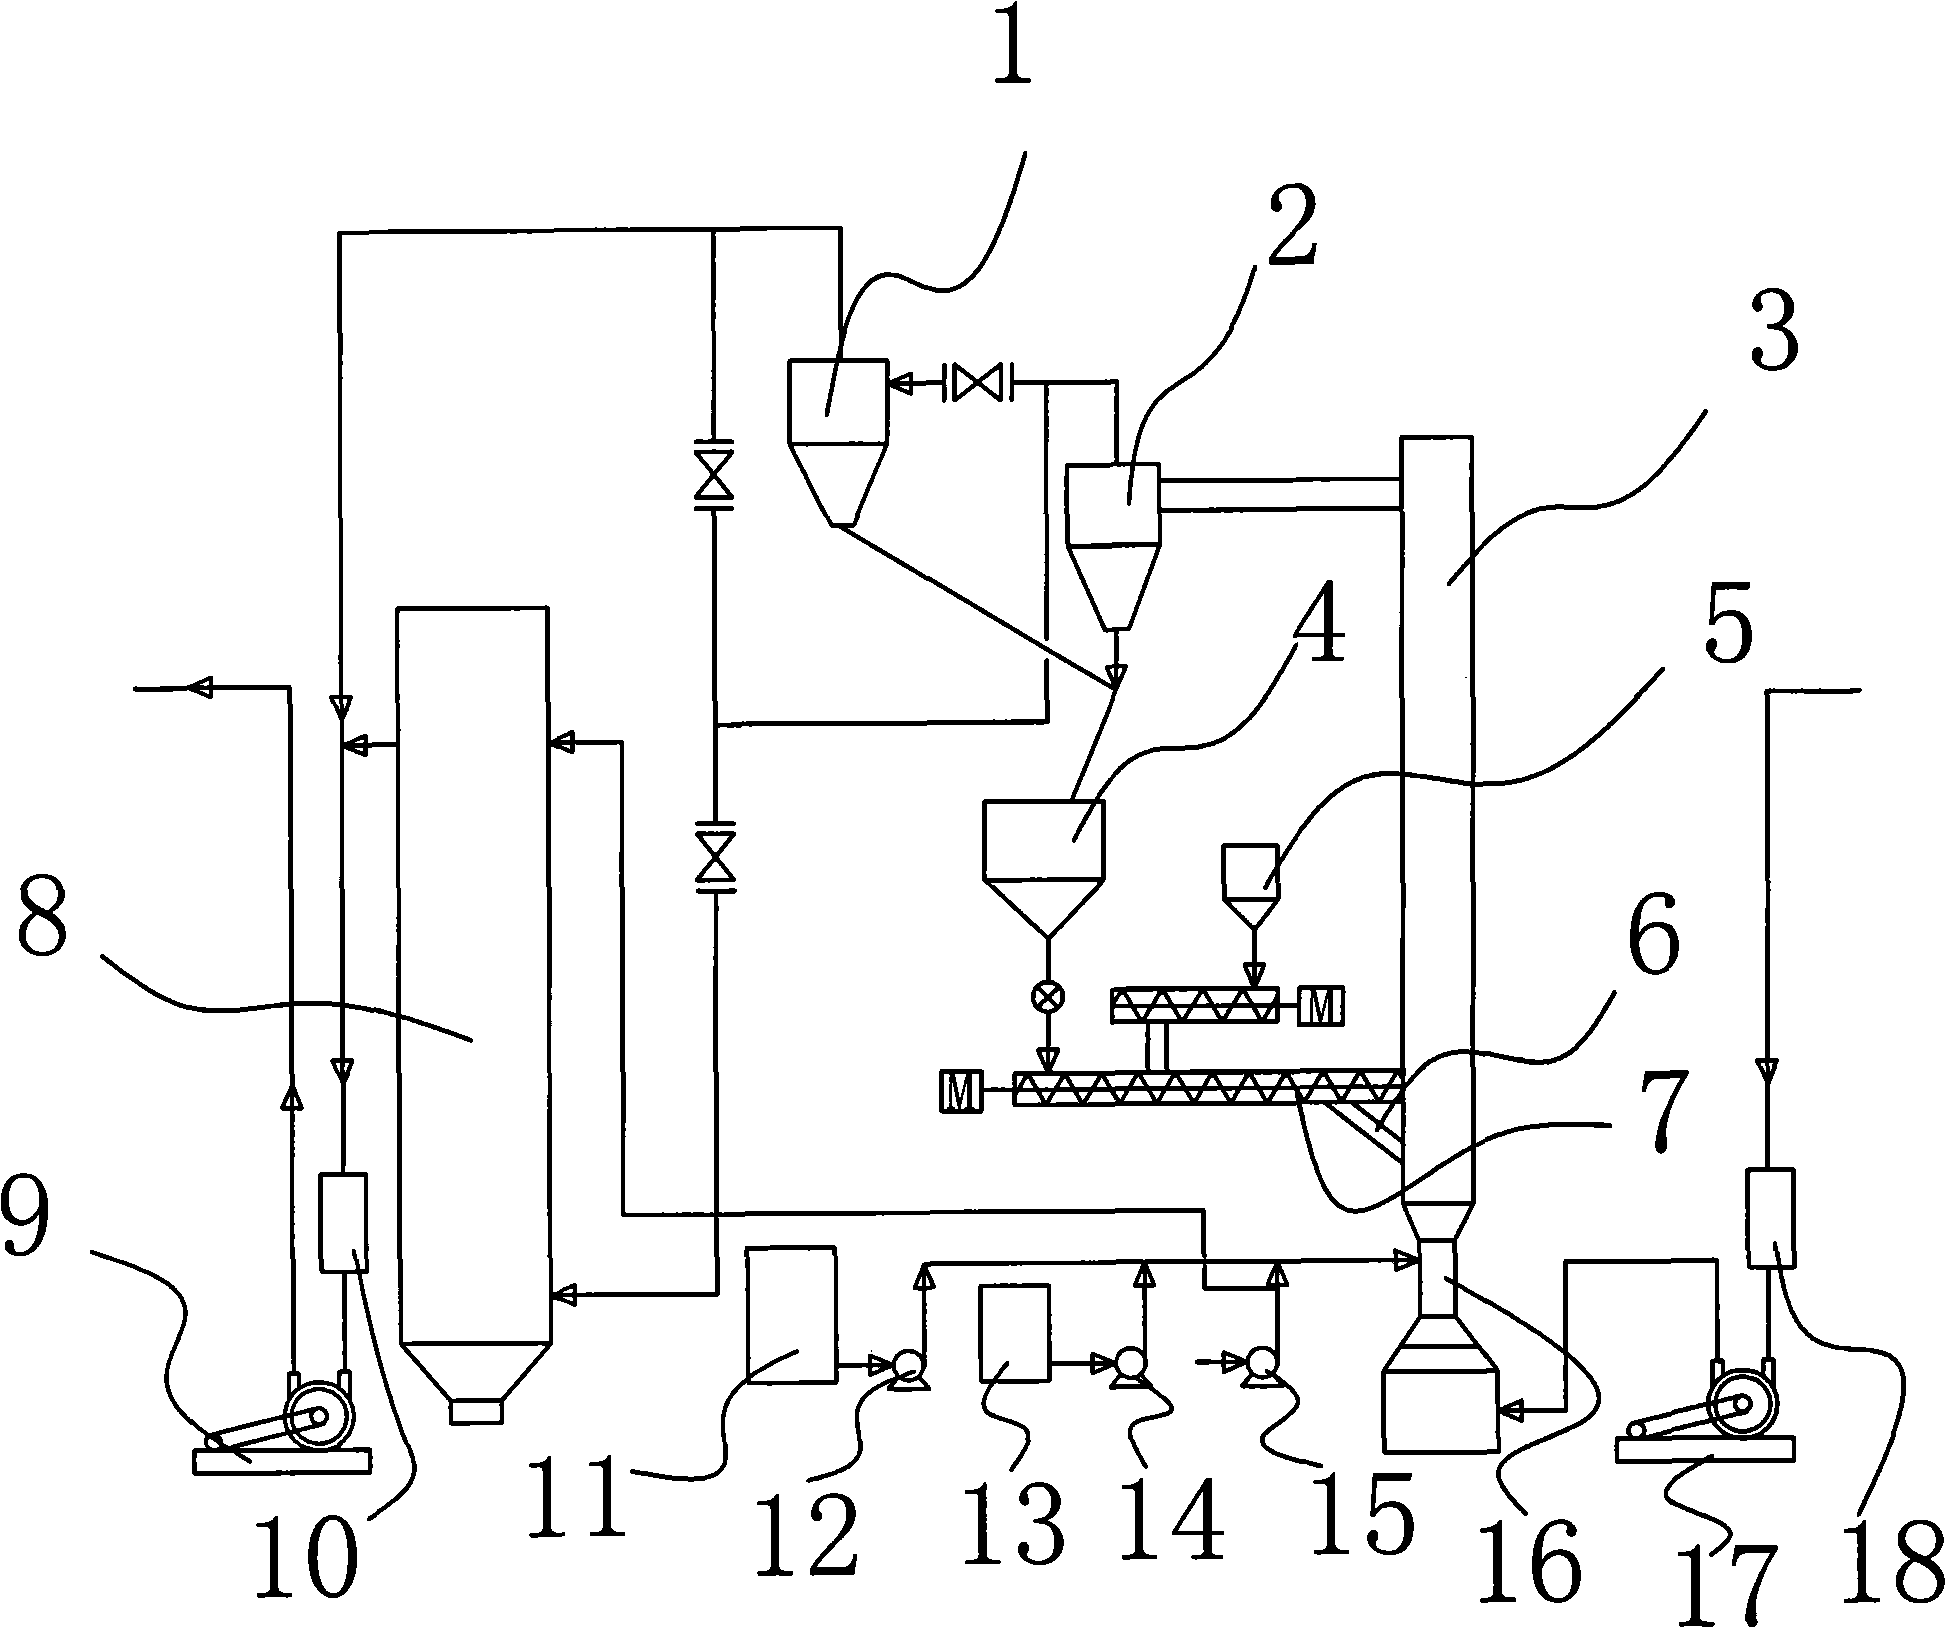 Flue gas desulfurization system for sintering machines